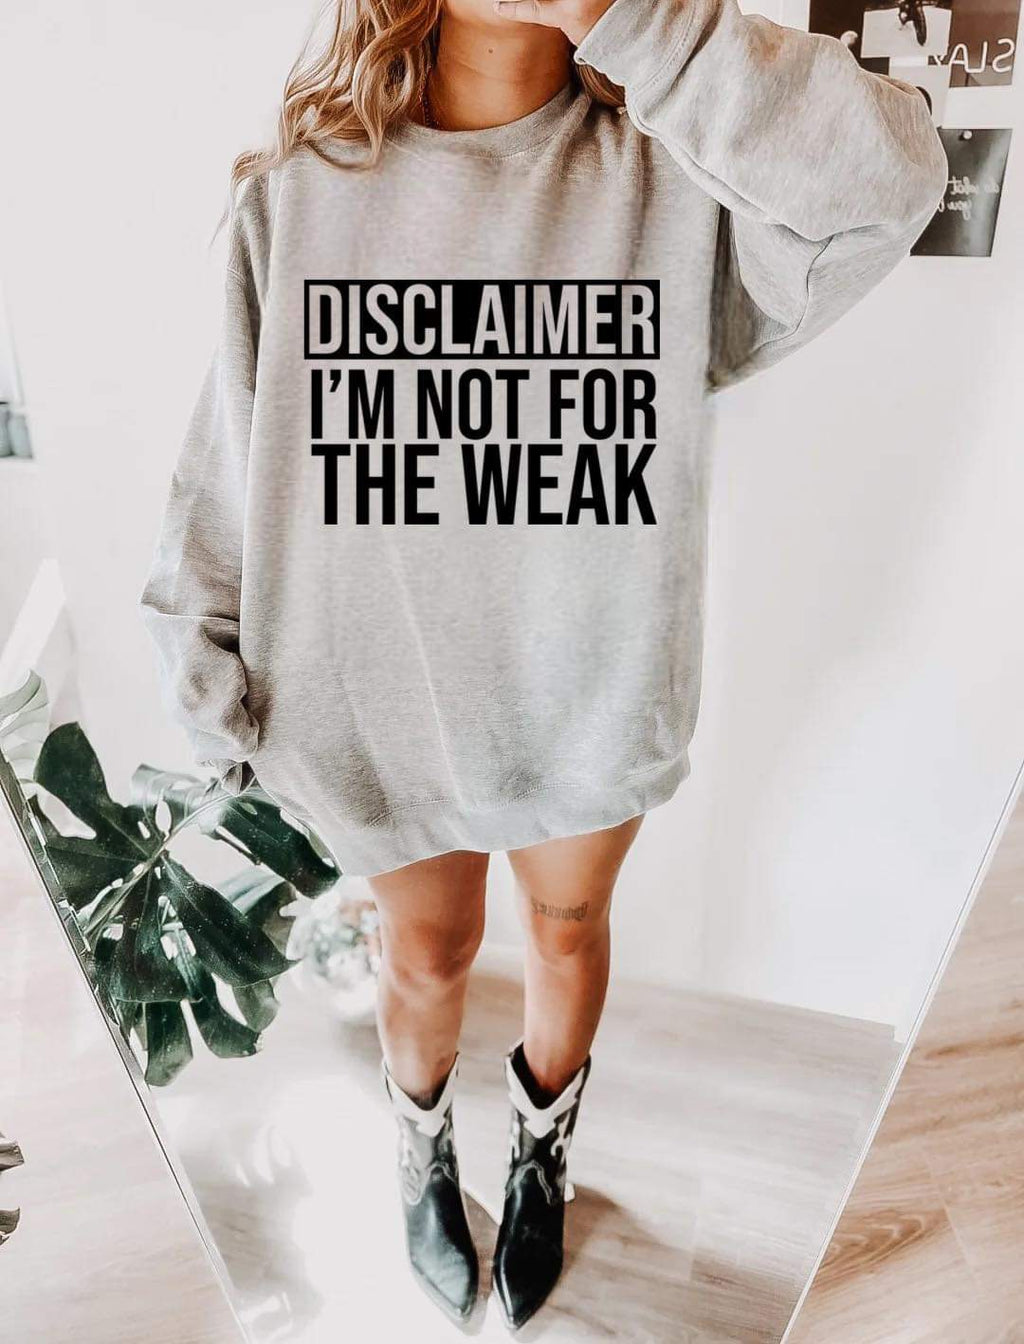 I'm Not For The Weak!